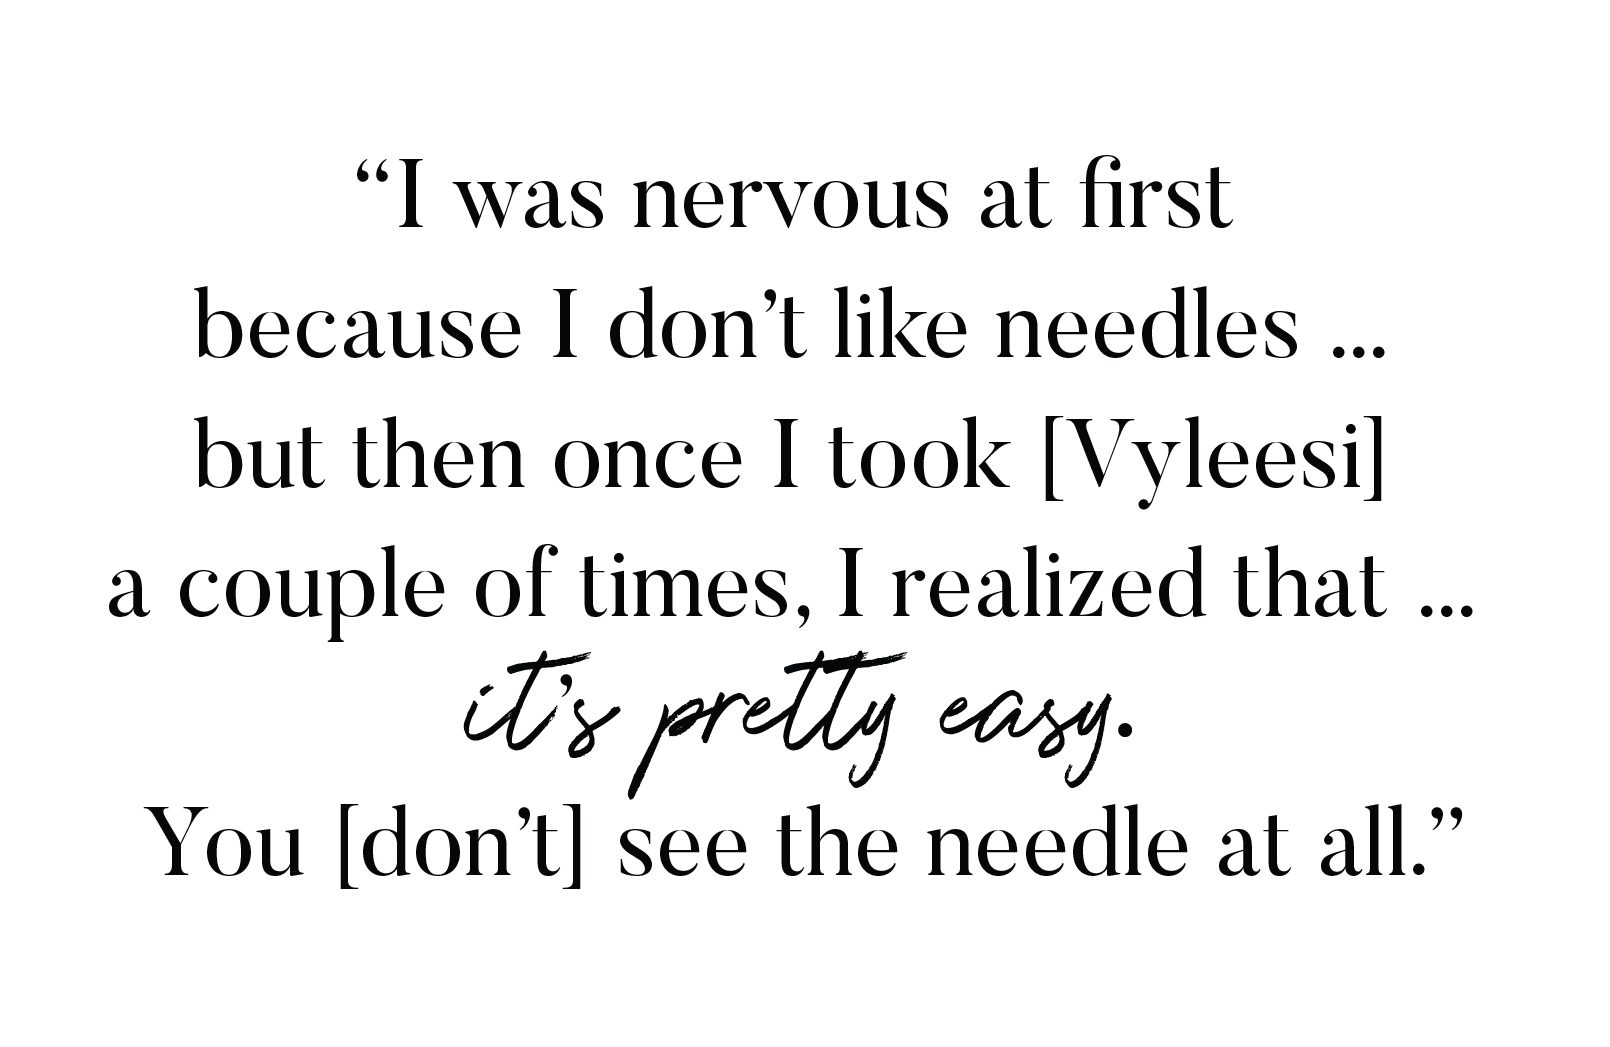 "I was nervous at first because I don't like needles... but then once I took Vyleesi a couple of times, I realized that it's pretty easy. You don't see the needle at all."